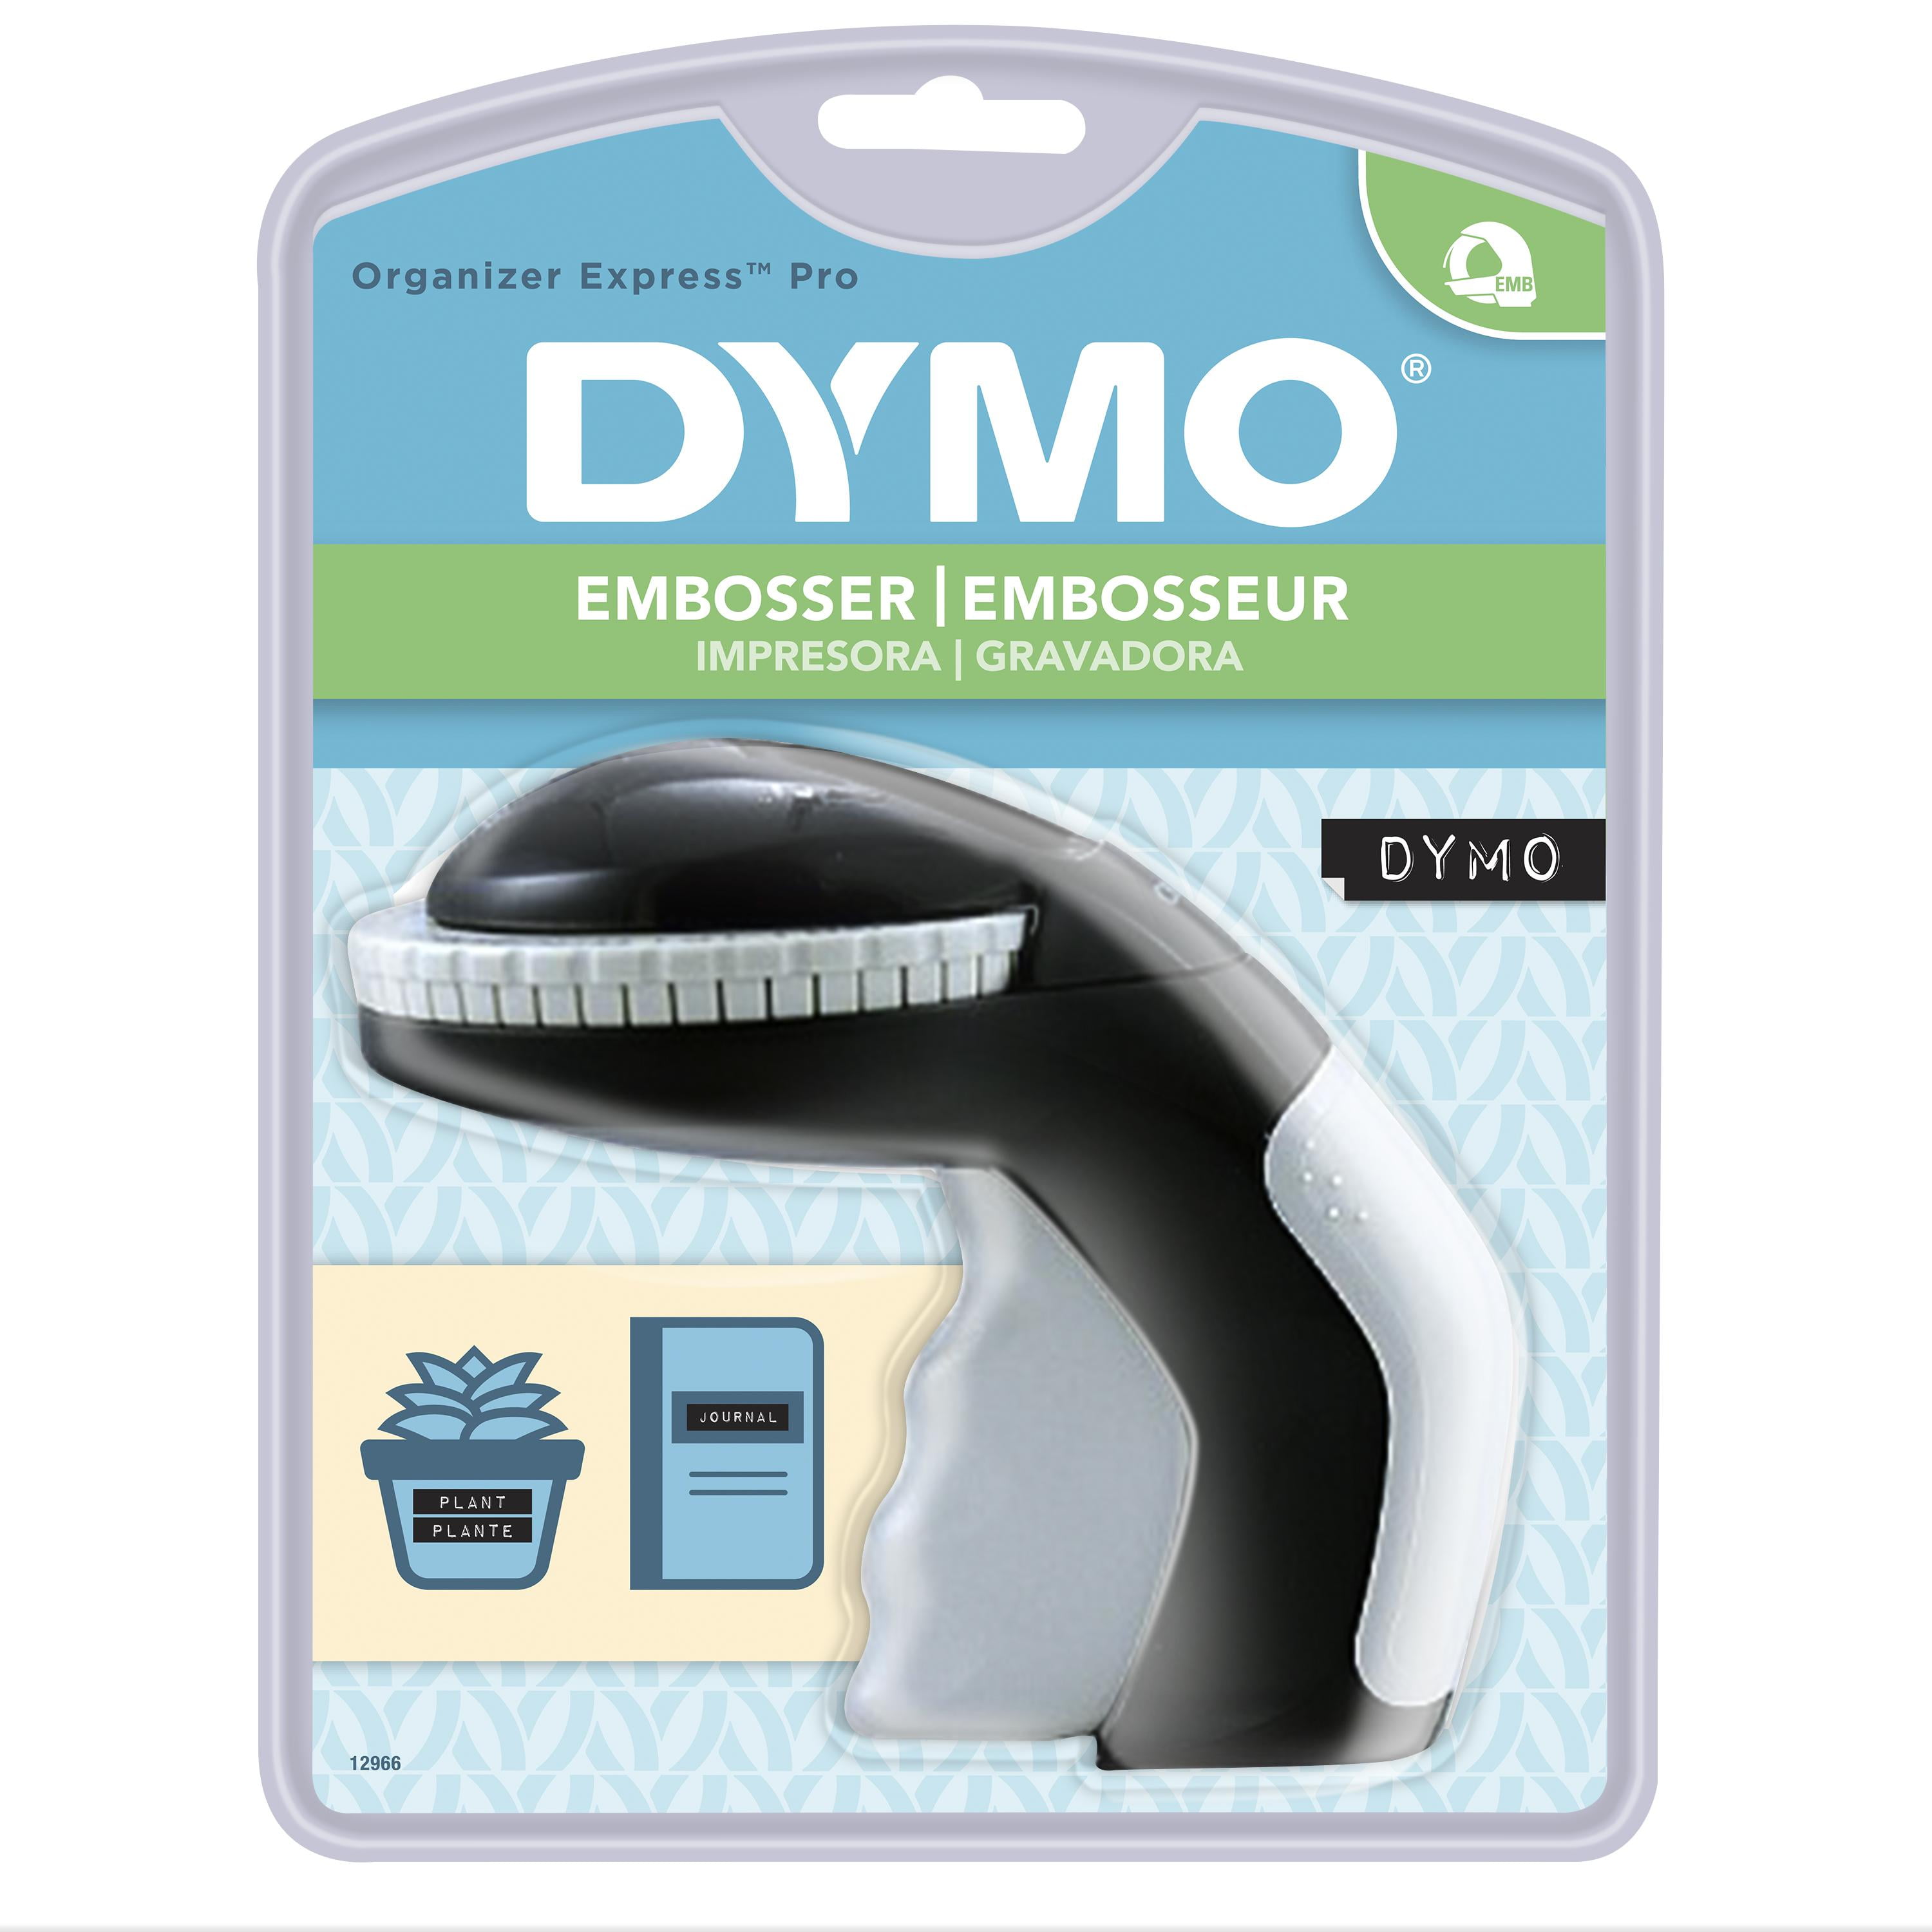 Details about   4PK For DYMO 3D Embossing Label Tape Organizer Xpress 520103 White on Green 9mm 